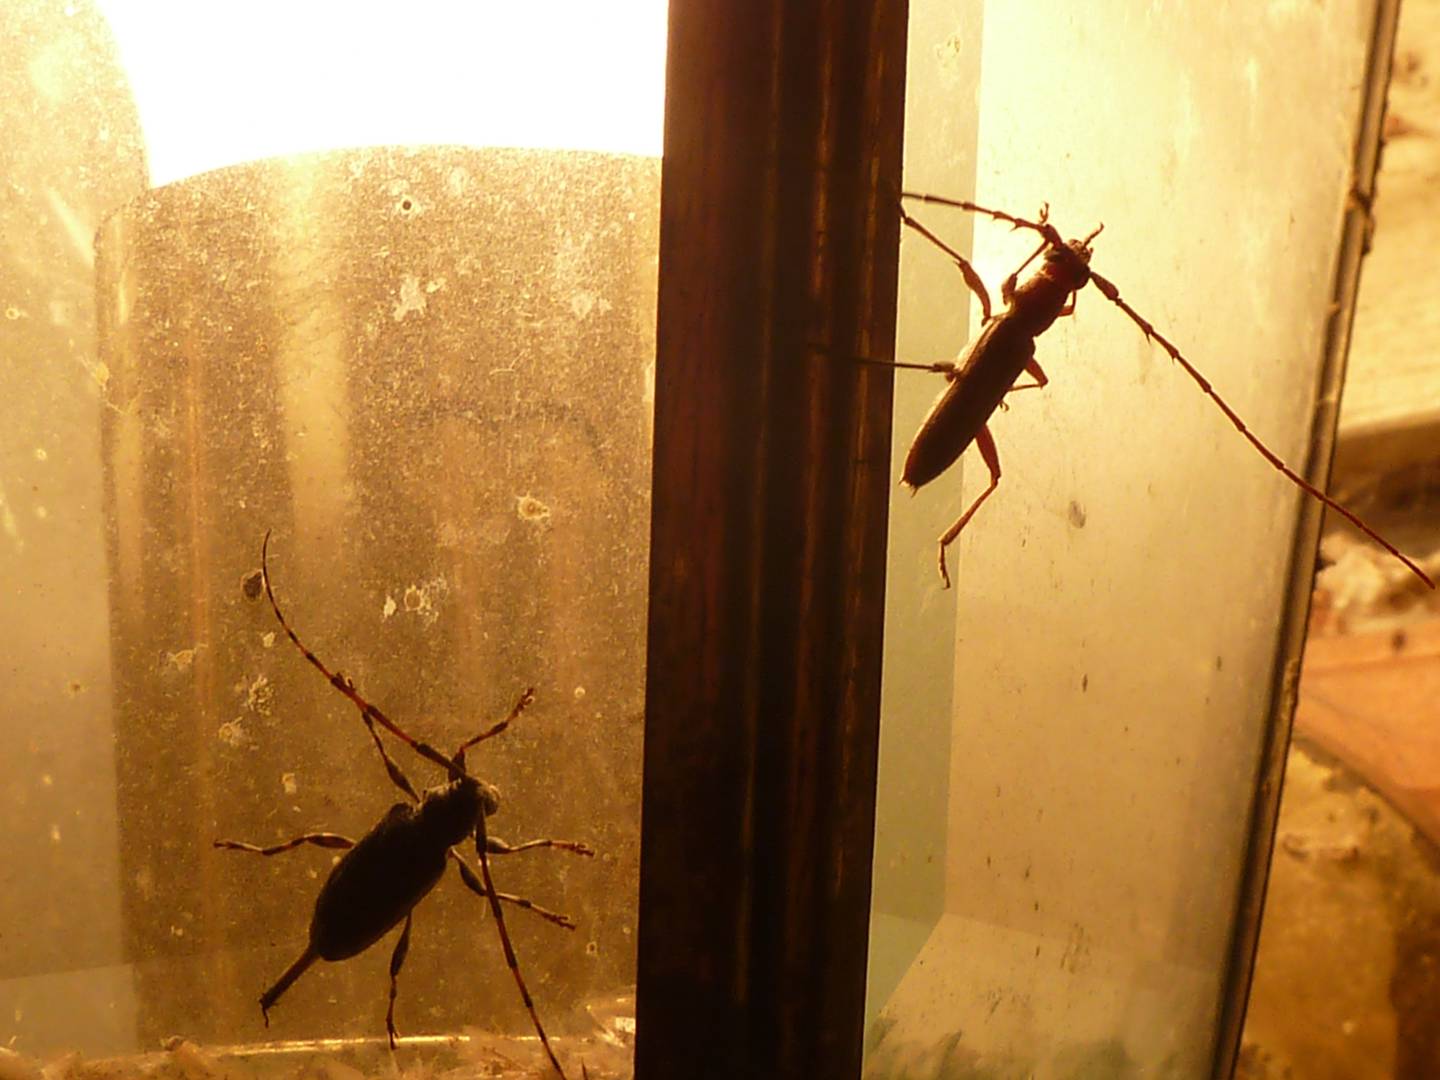 Two long-horned beetles found themselves attracted to the light, and each other, on a recent summer night.